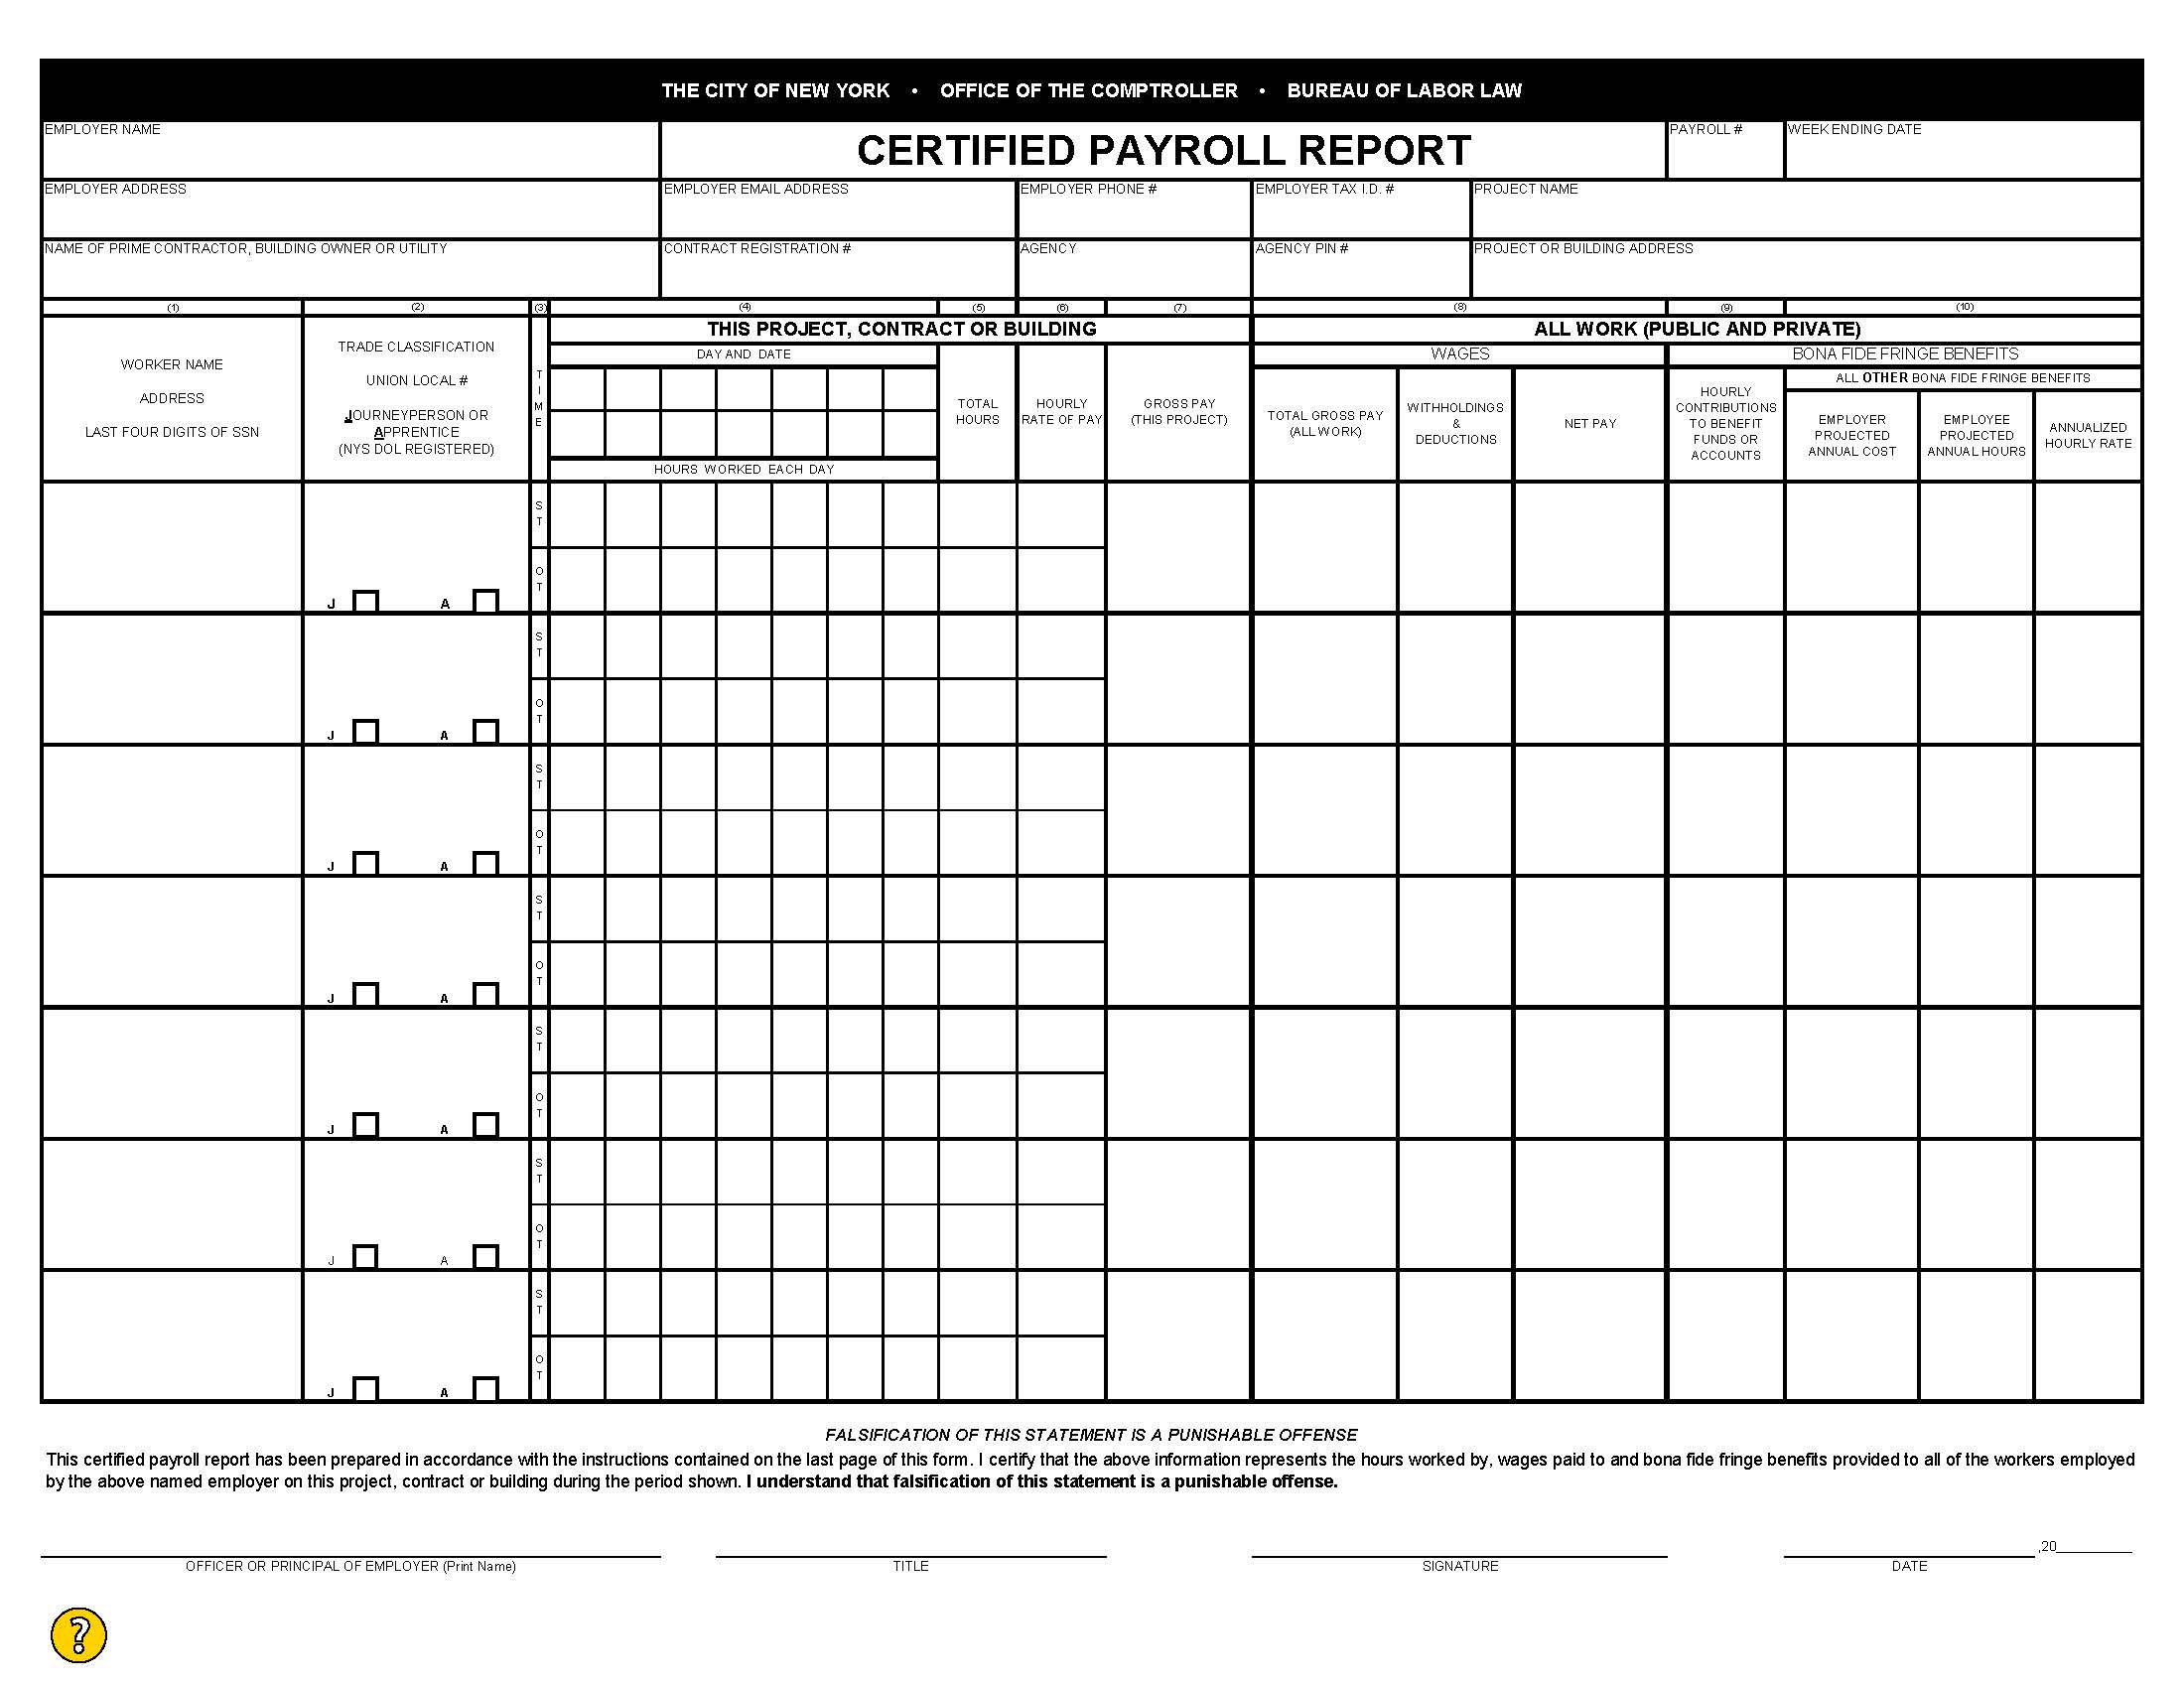 Payroll Report Template For Your Needs